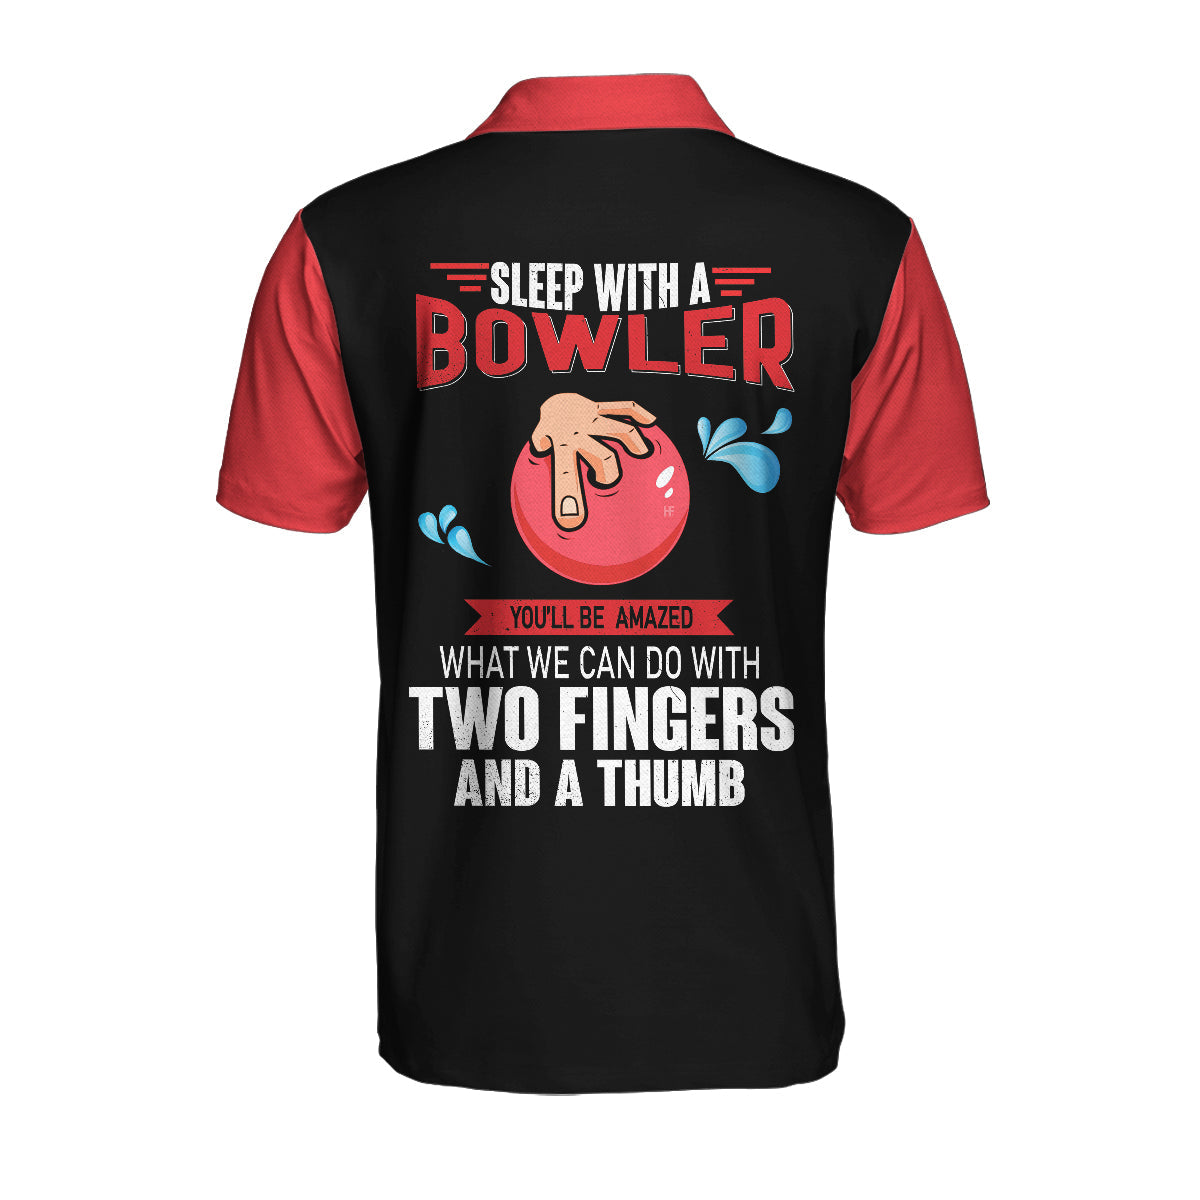 Sleep With Bowler Polo Shirt/ Black And Red Bowling Short Sleeve Polo Shirt/ Funny Shirt With Sayings Coolspod